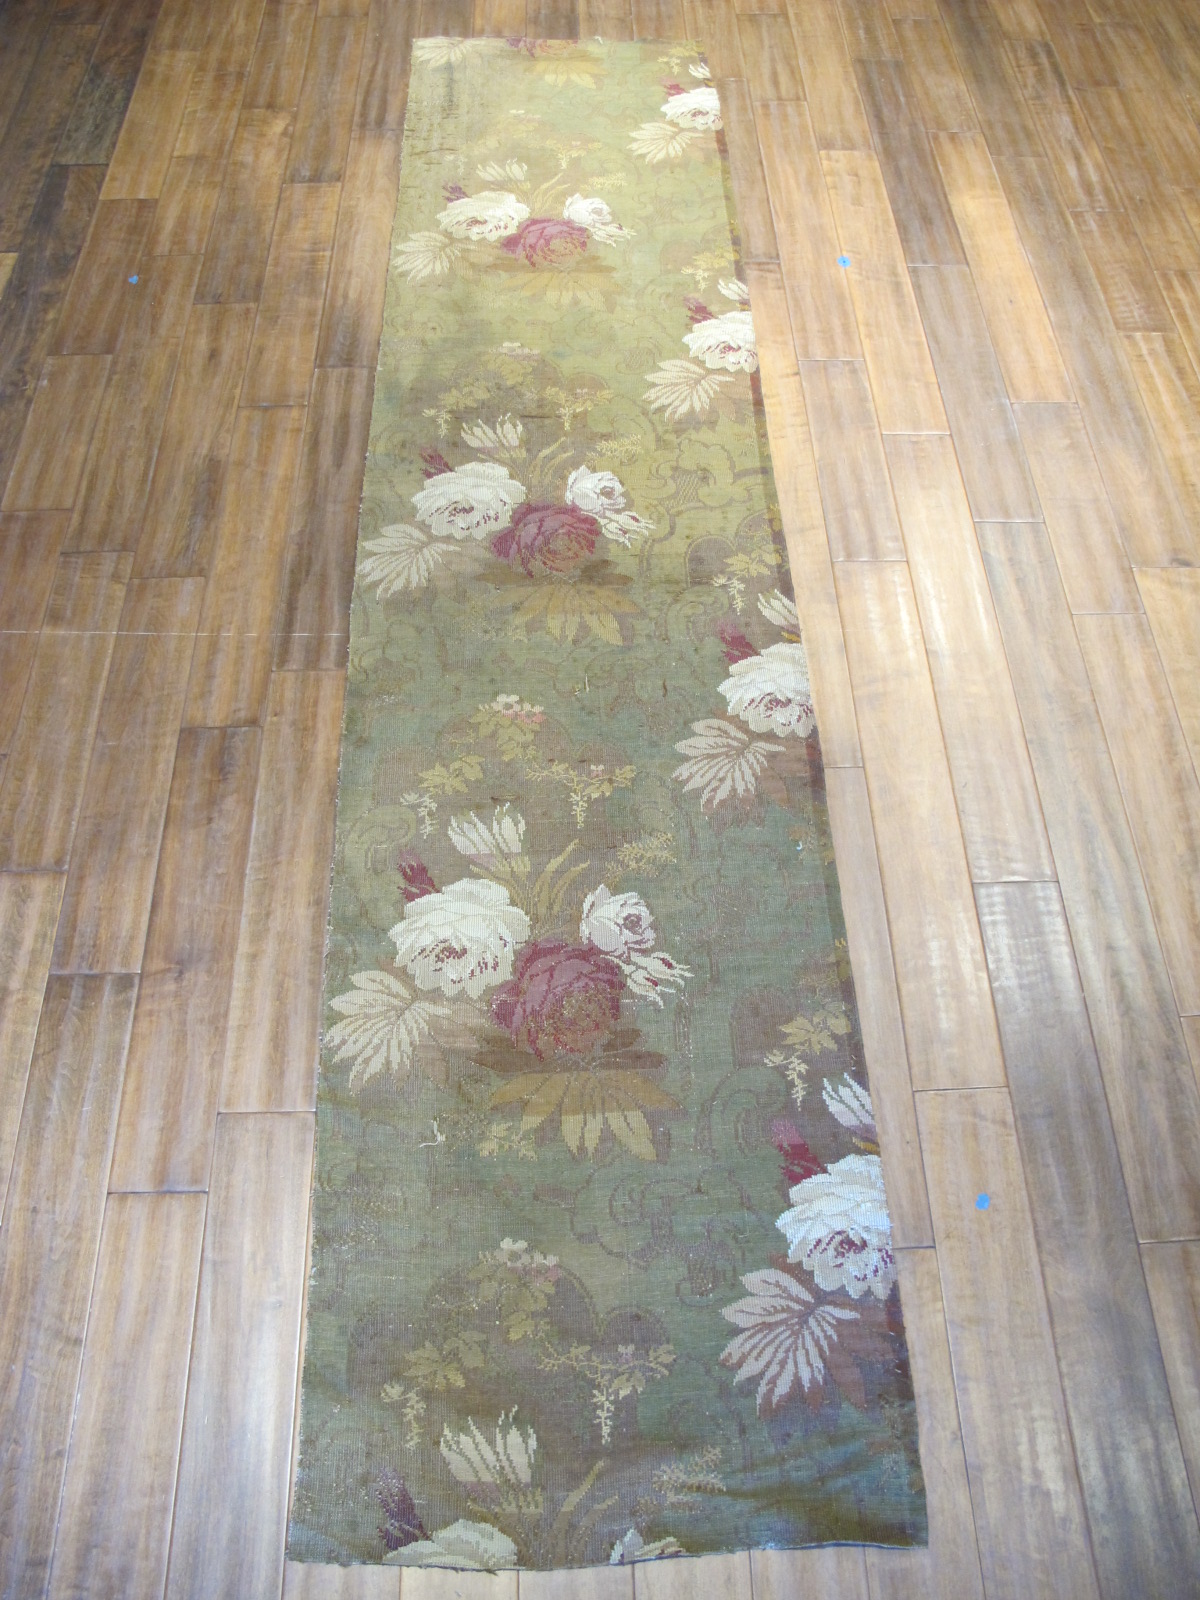 Jacquard Loom Rug | Europe | Antique, Early 1800s